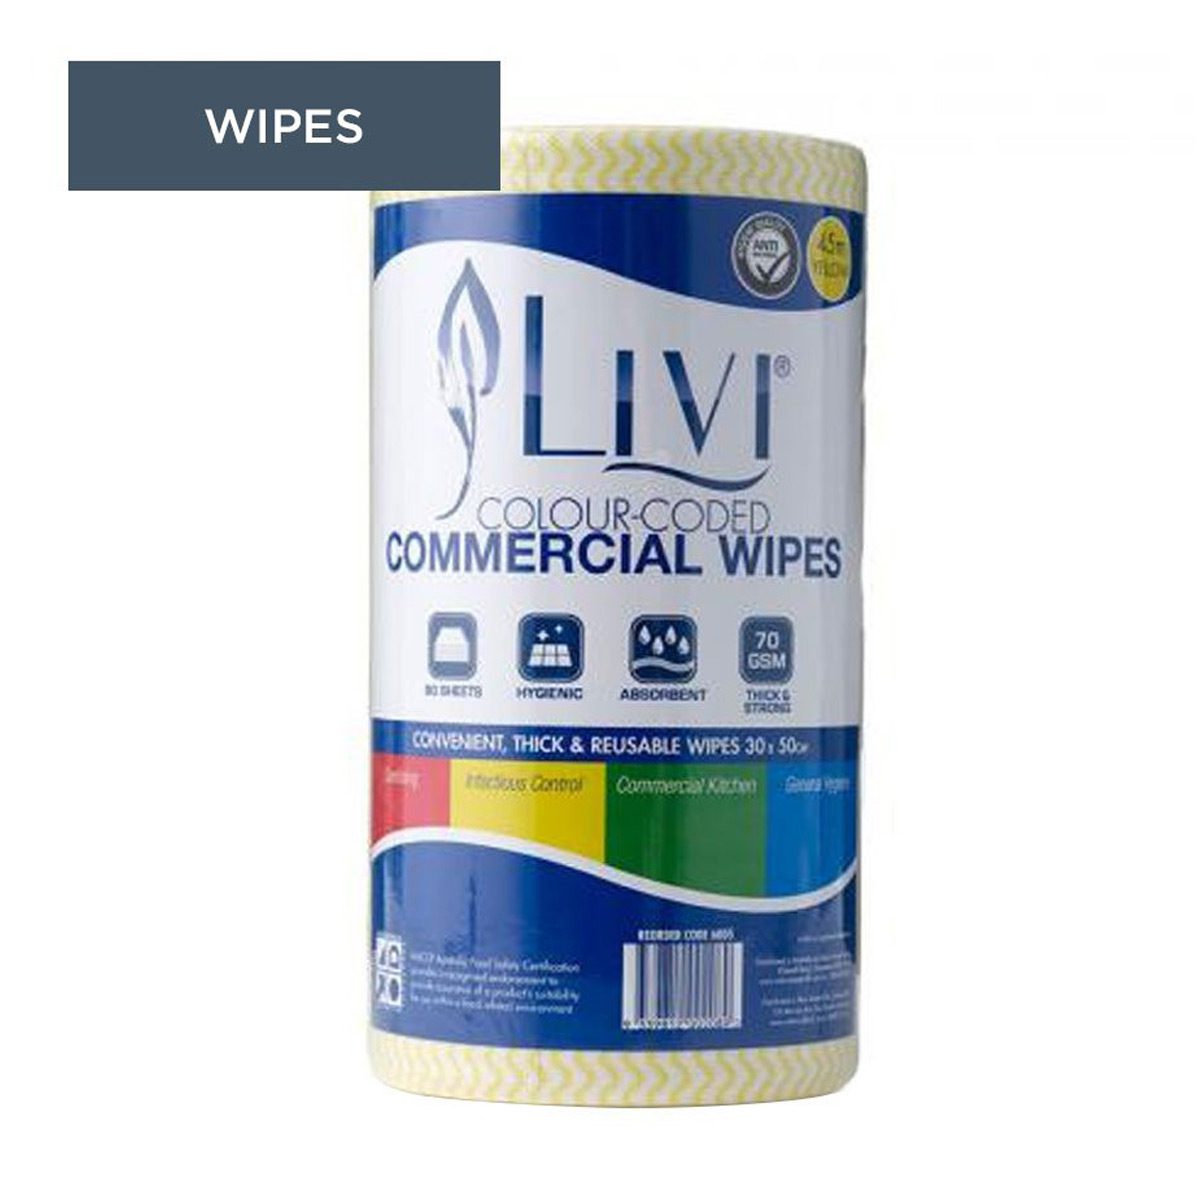 cleaning-equipment-cloths-scourers-wipes-livi-prem-yellow-wipes-90-sheets-convenient-thick-reusable-hygienic-absorbent-perforated-roll-four-different-colours-vjs-distributors-6005